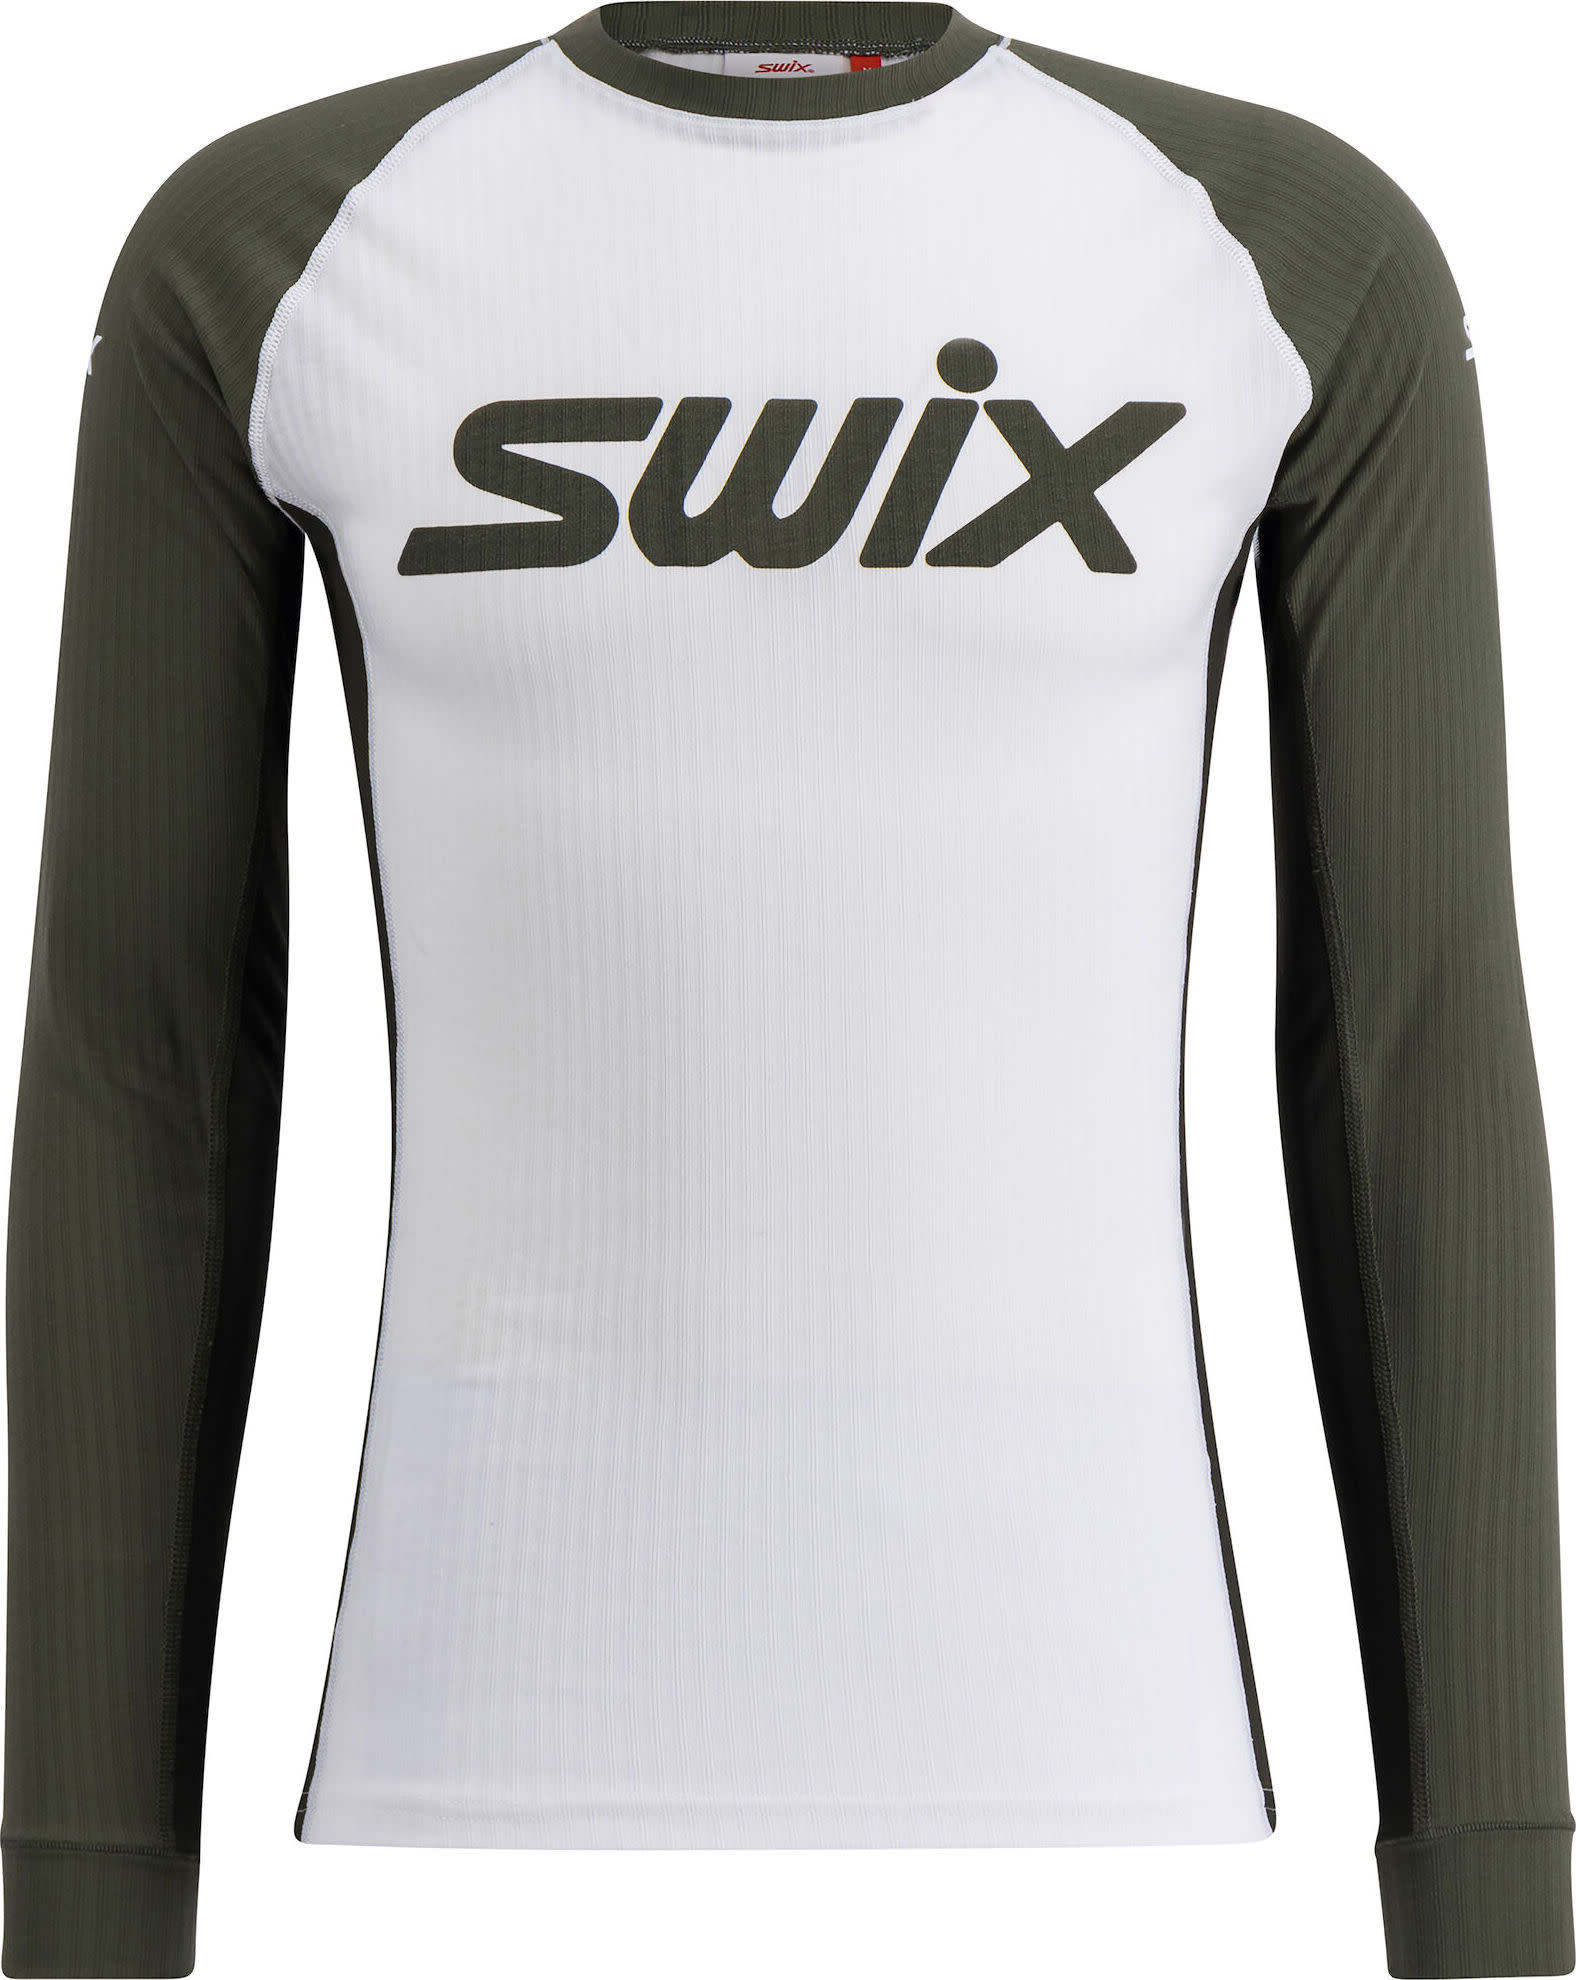 Men’s RaceX Classic Long Sleeve Bright White/ Olive